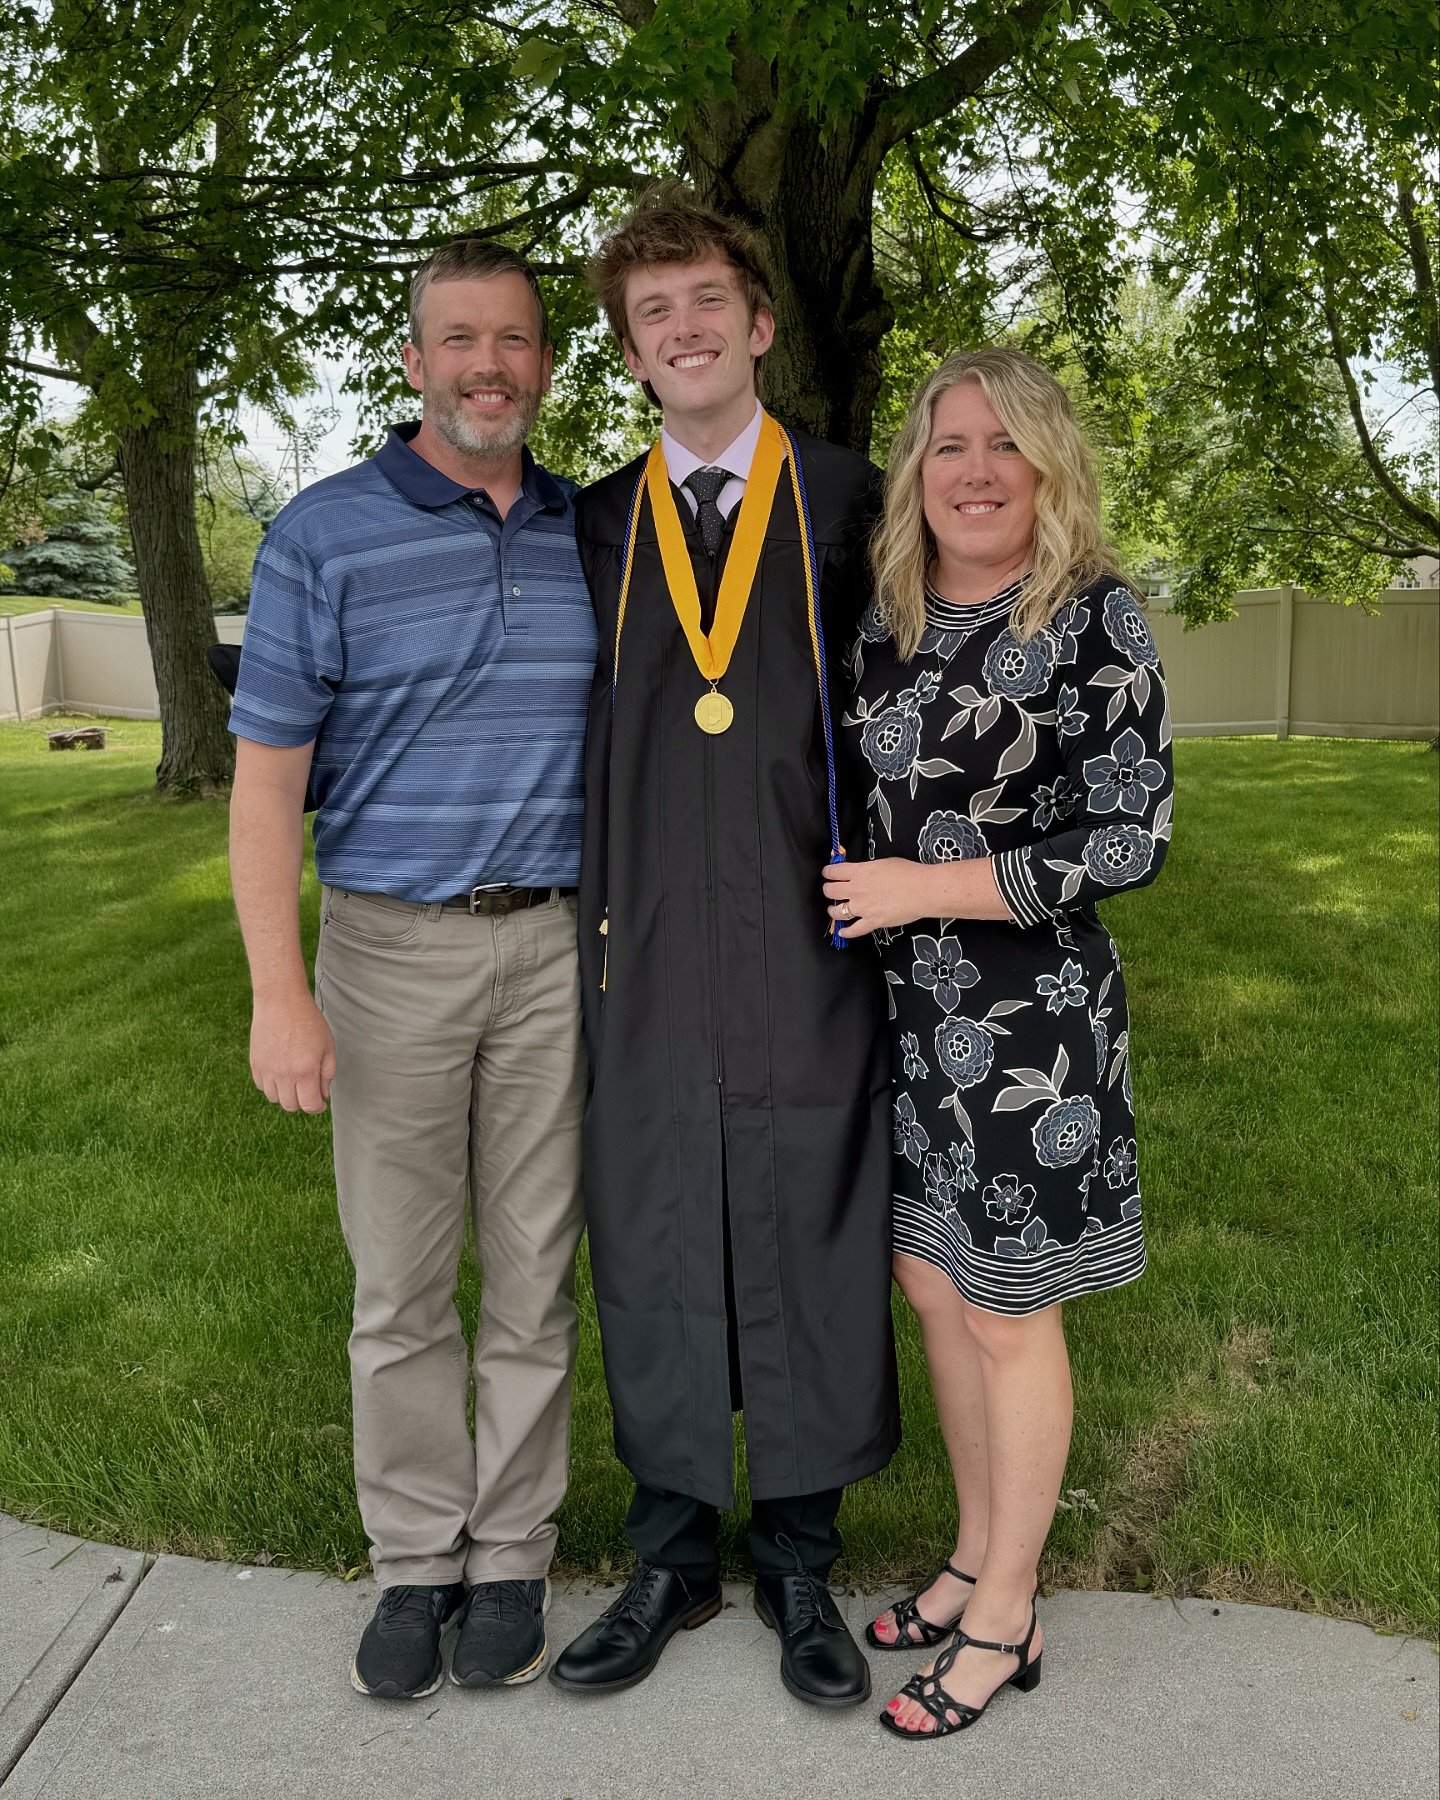 Big day yesterday as our boy graduated high school 👨🏻&zwj;🎓 We are so proud of not just his many accomplishments, but of the man he is becoming 🥰 On to the next chapter!